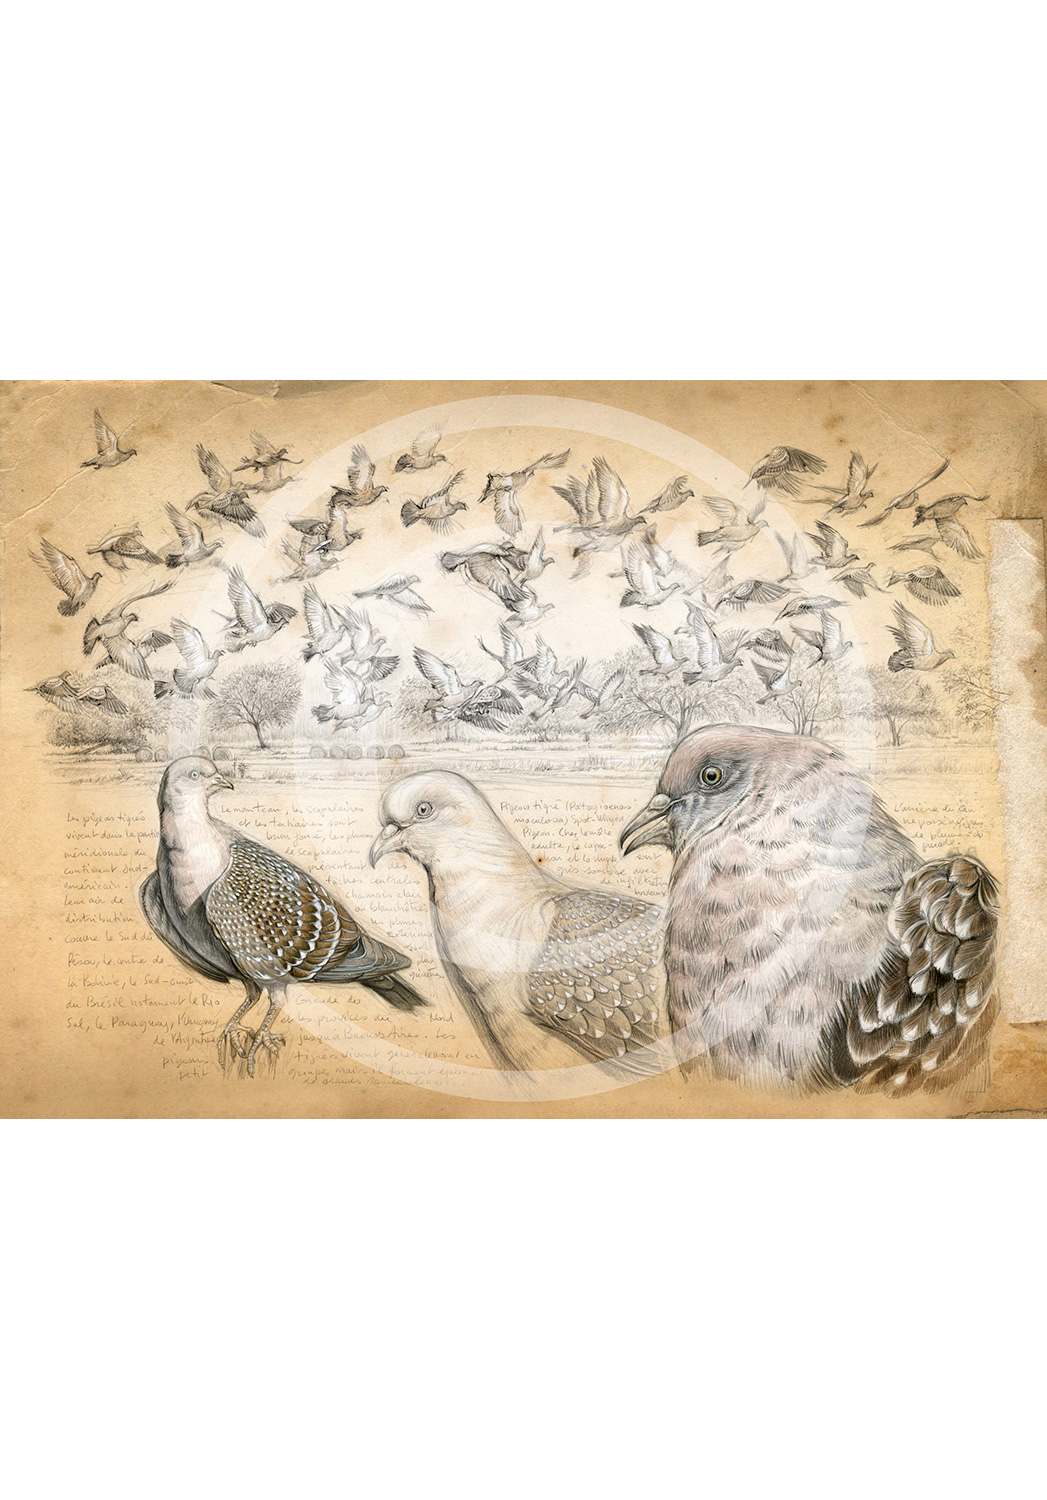 Marcello-art: Prints on canvas 232 - Spot-winged Pigeon